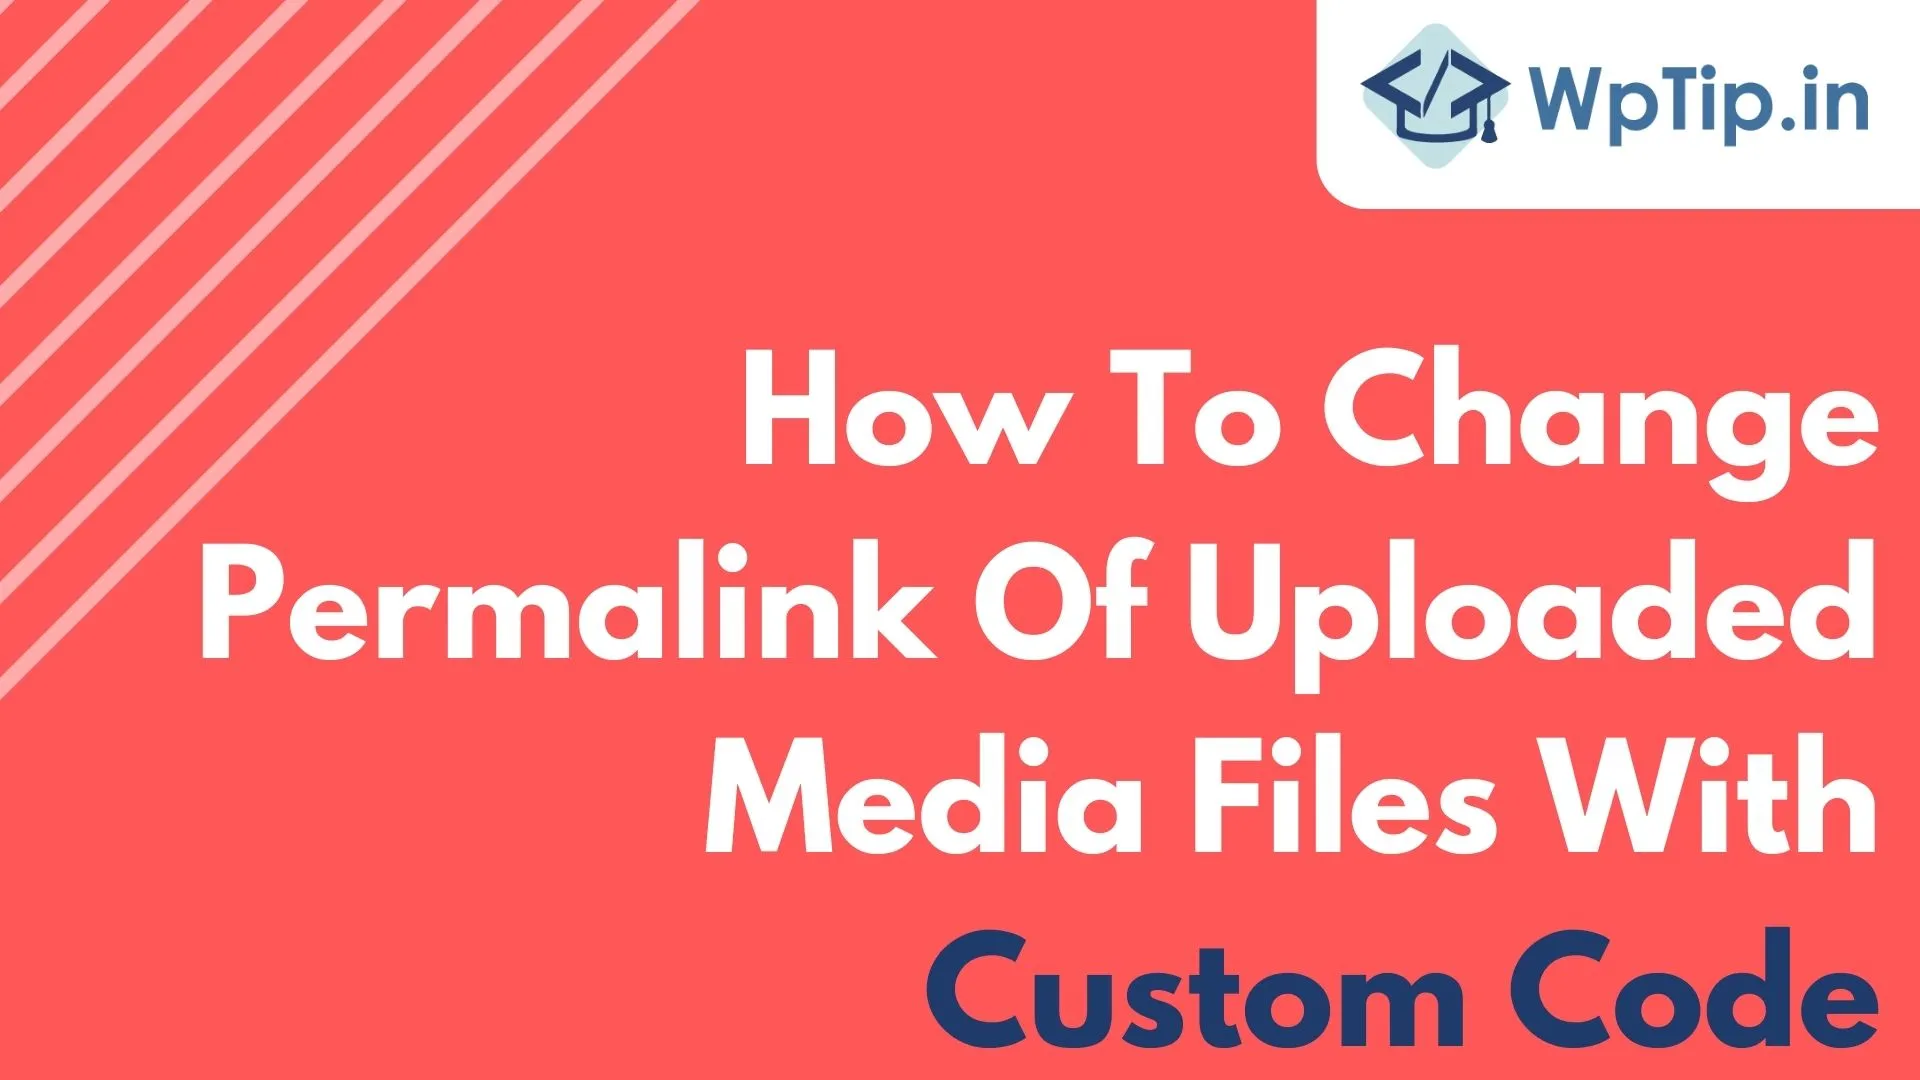 You are currently viewing How To Change Permalink Of Uploaded Media Files With Custom Code